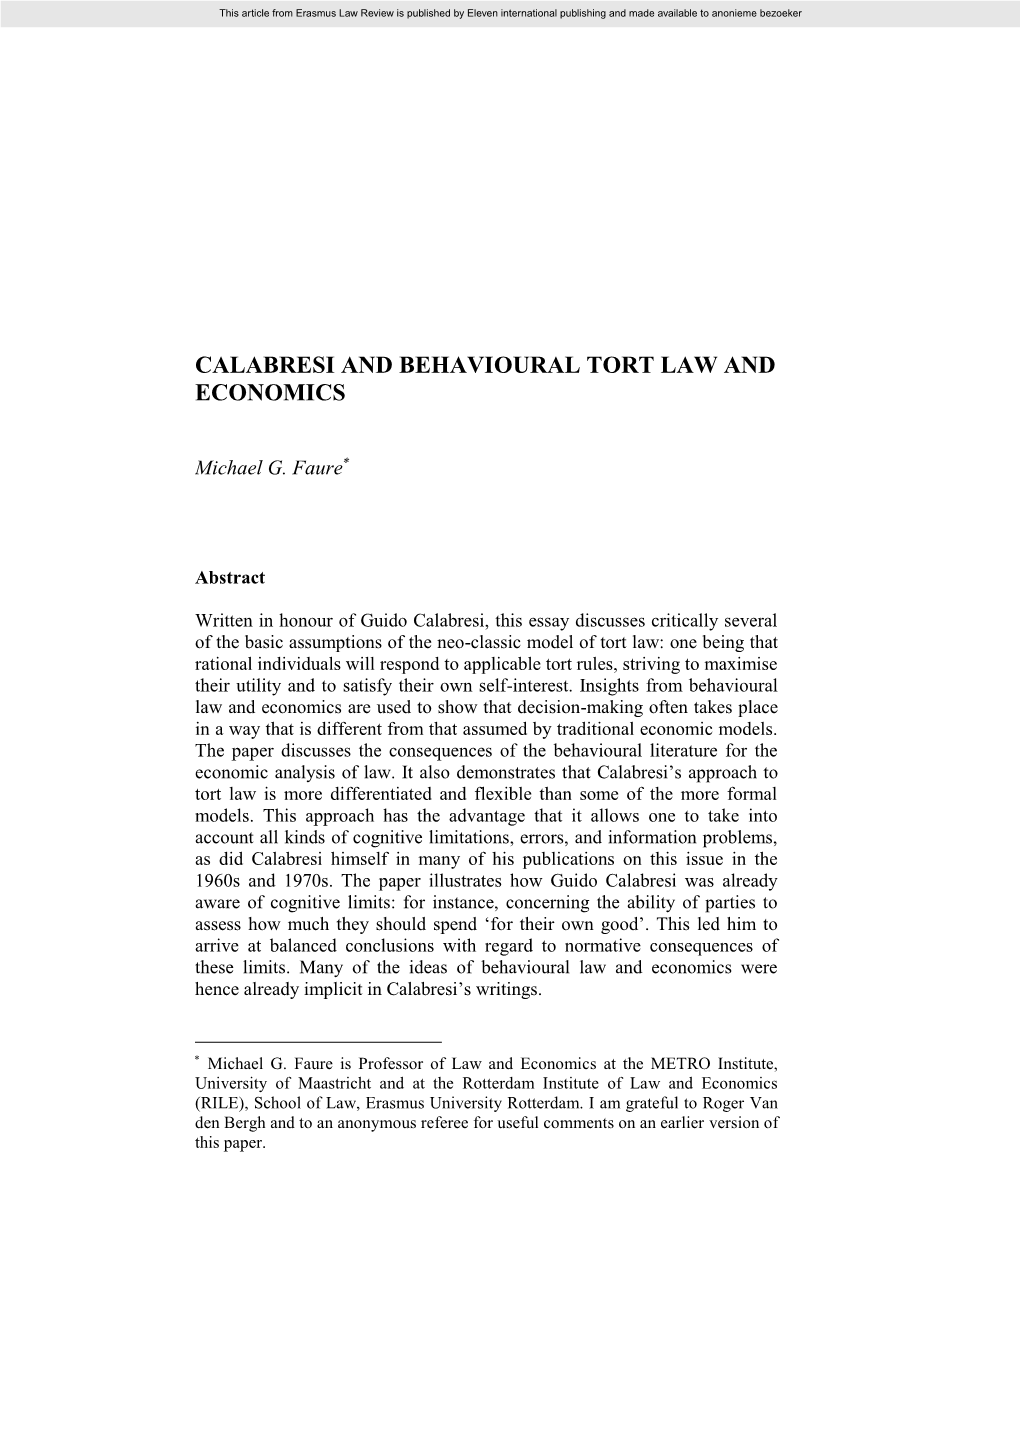 Calabresi and Behavioural Tort Law and Economics